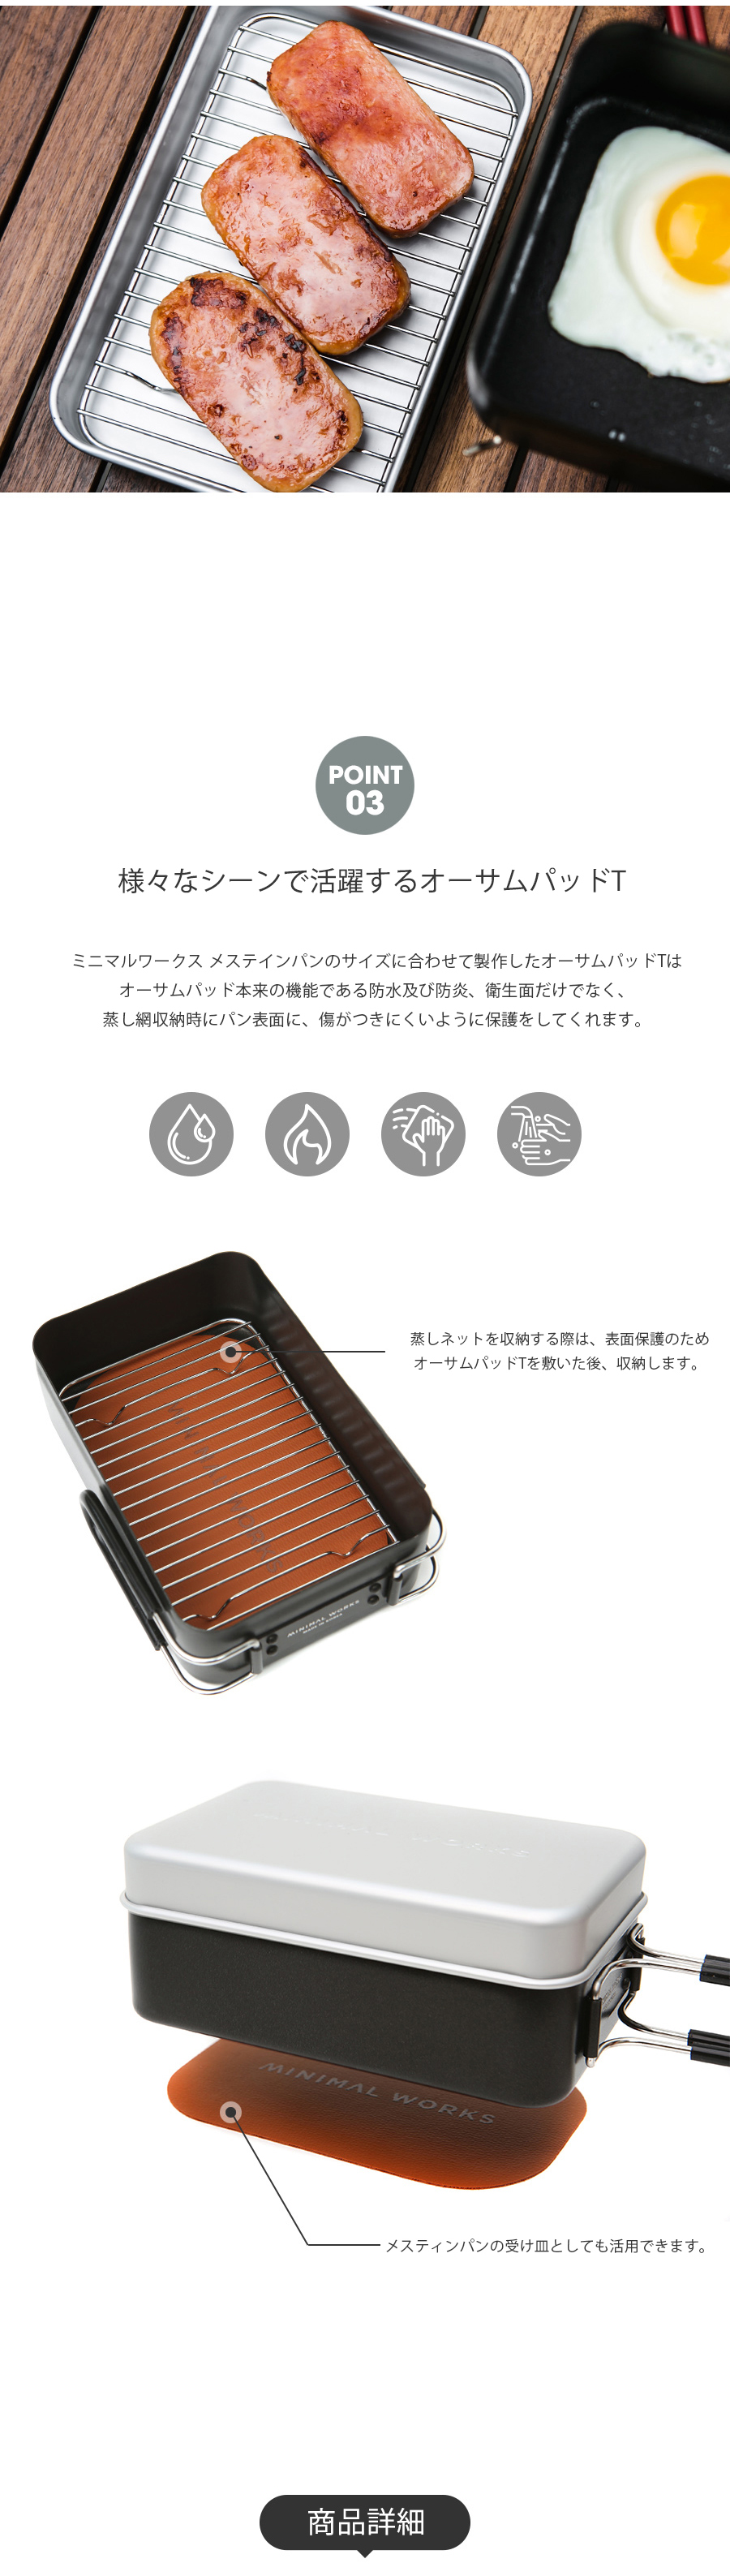 MINIMAL WORKS (ミニマルワークス) AWESOME PAD T & STEAM GRILL SET ...